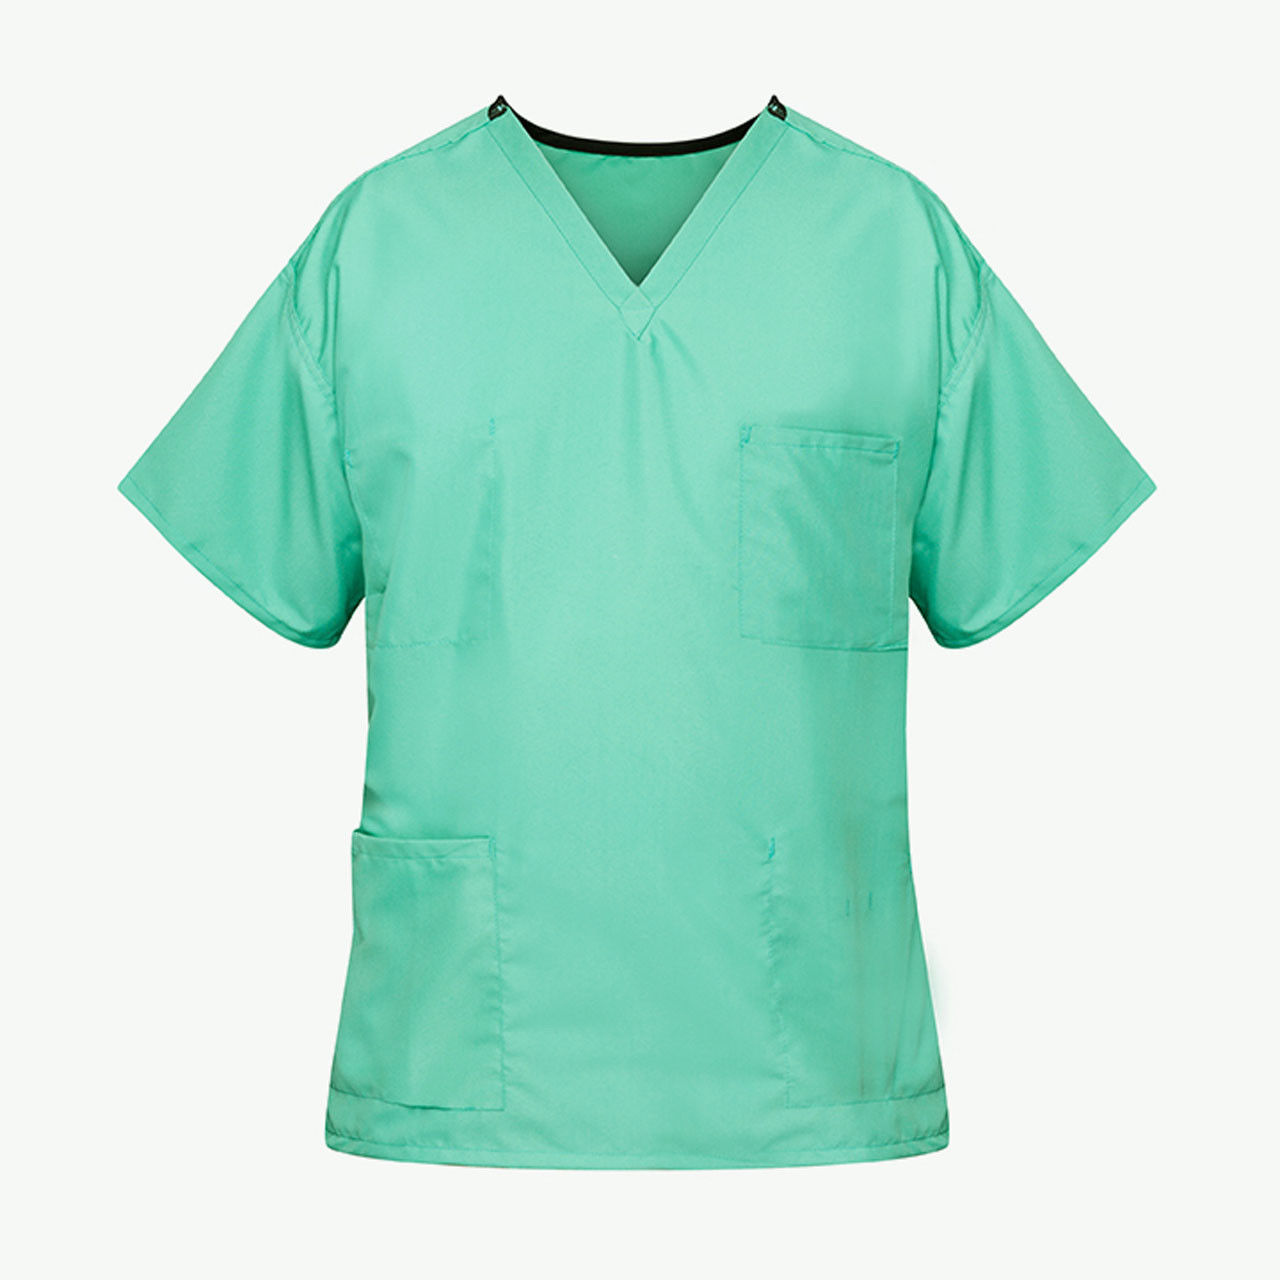 What pockets does this case of 24 jade green scrubs have?